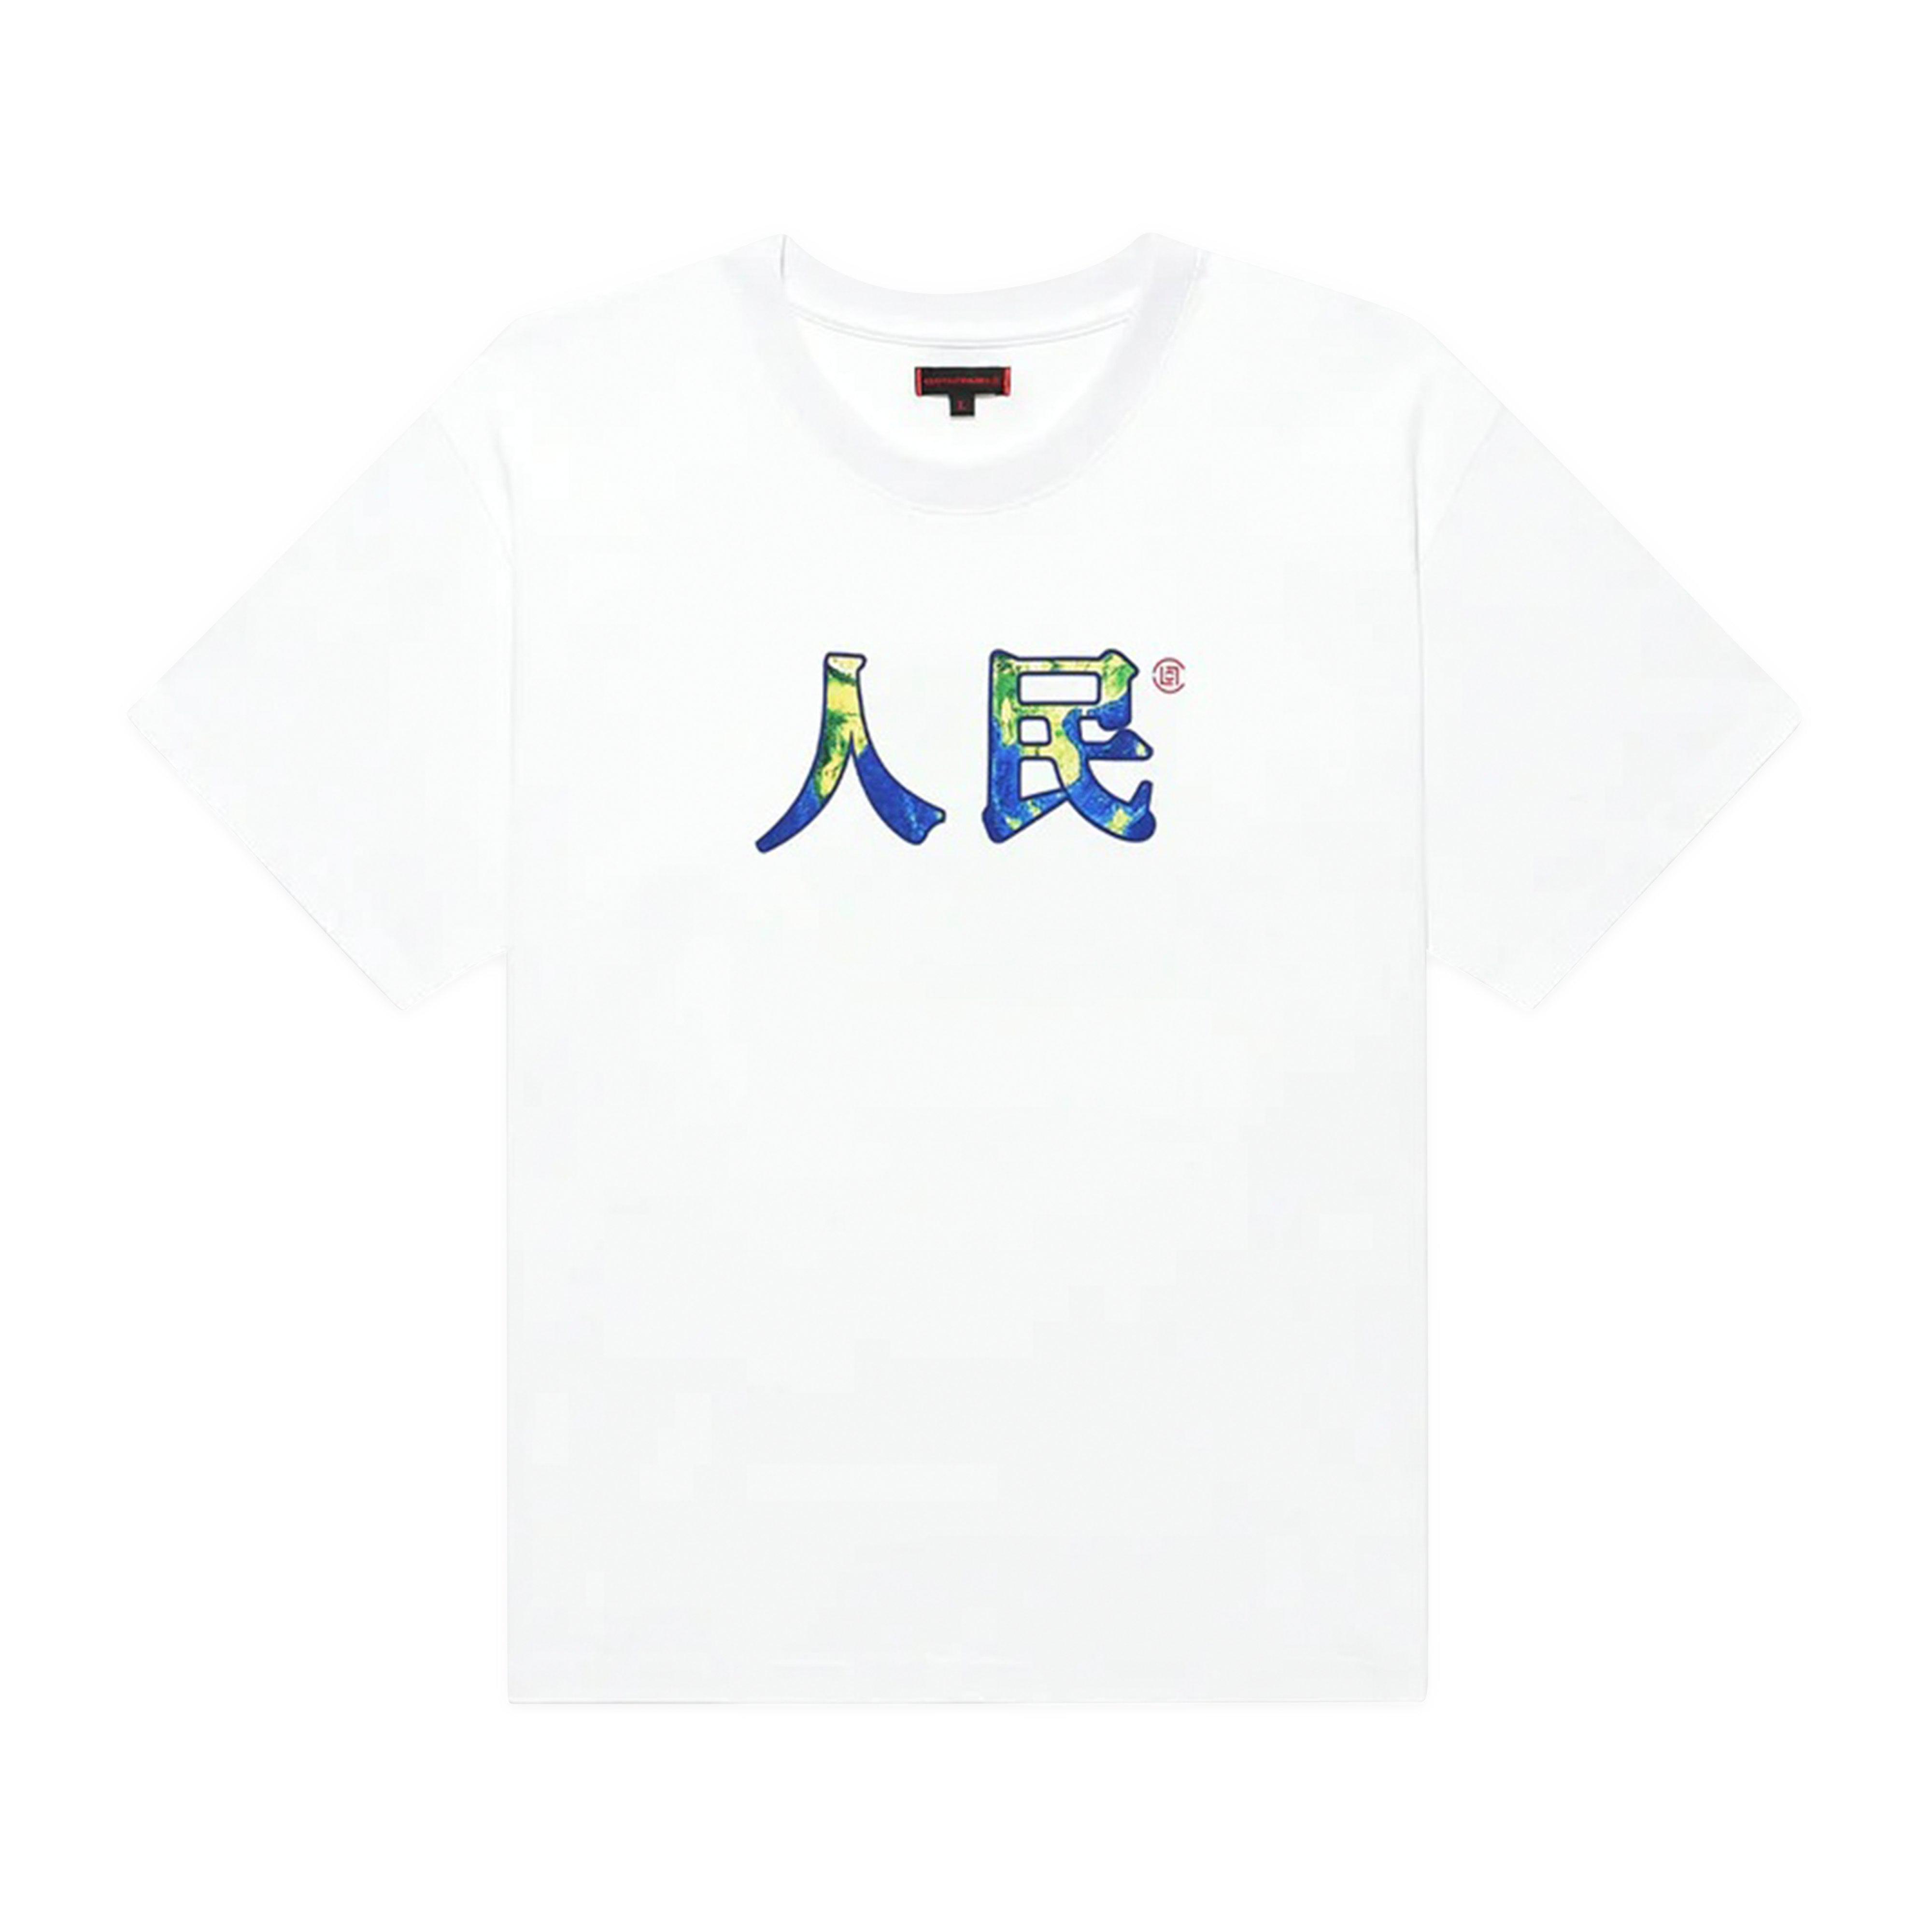 Clot 'The People" T-Shirt (White) by CLOT